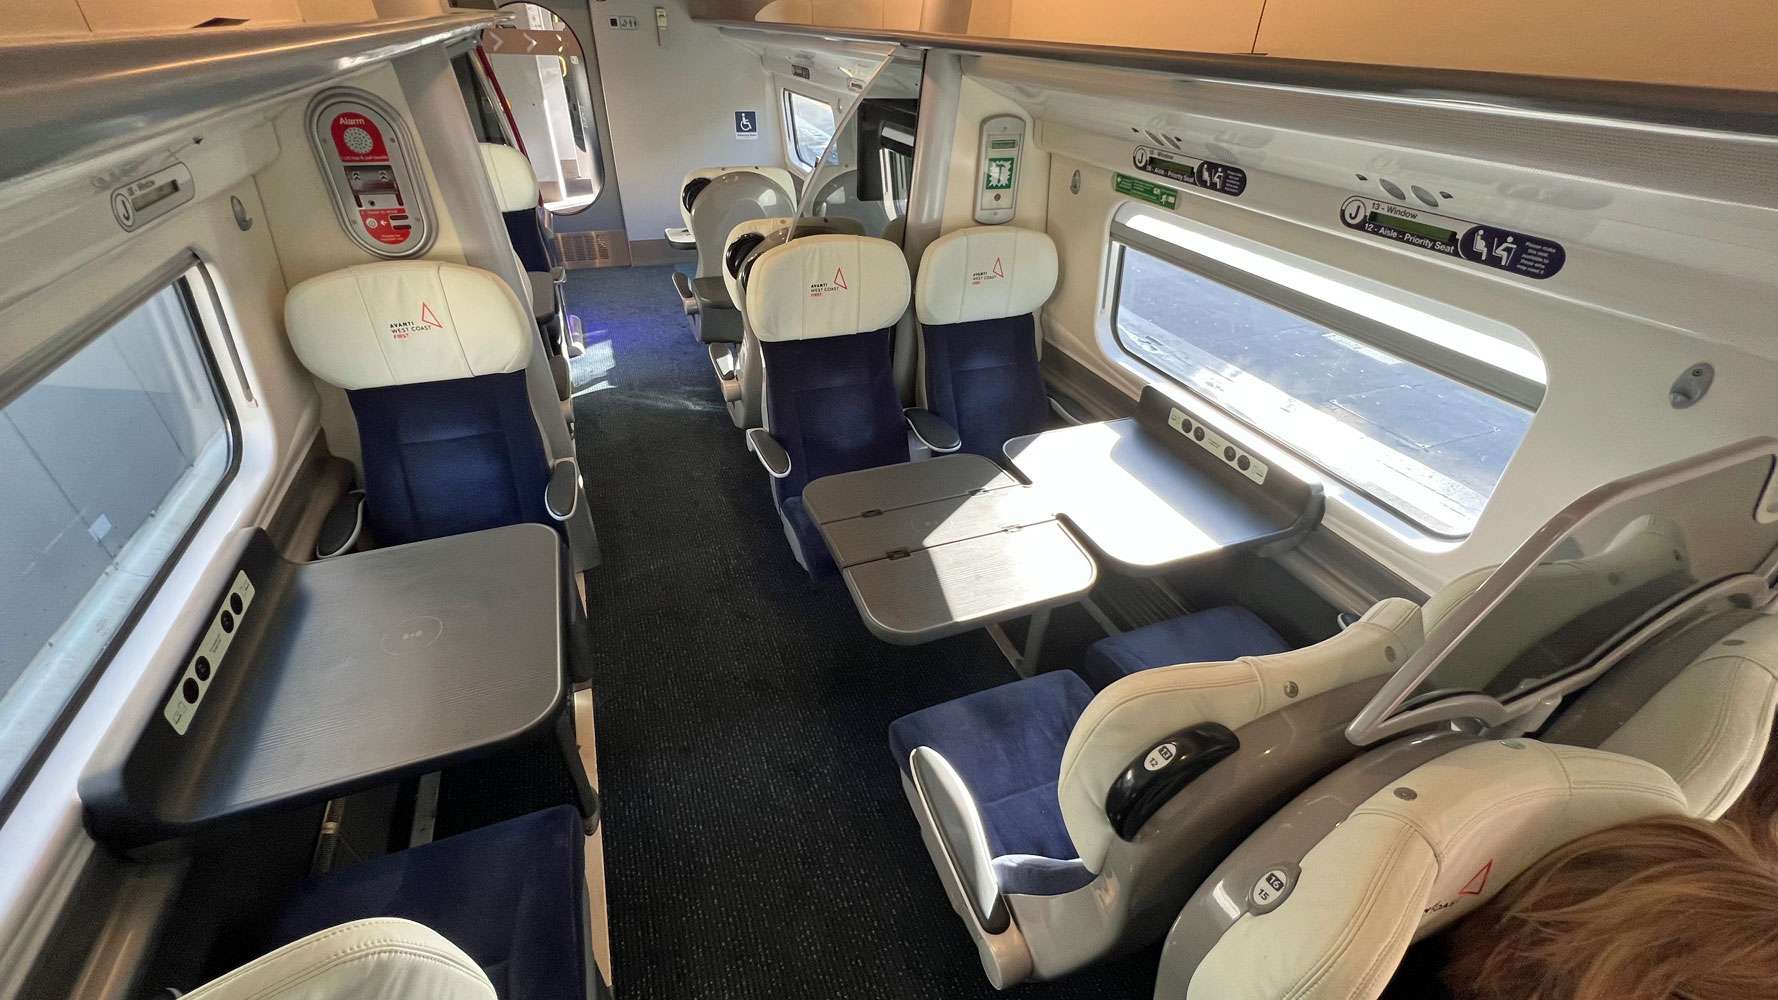 1st class travel to london